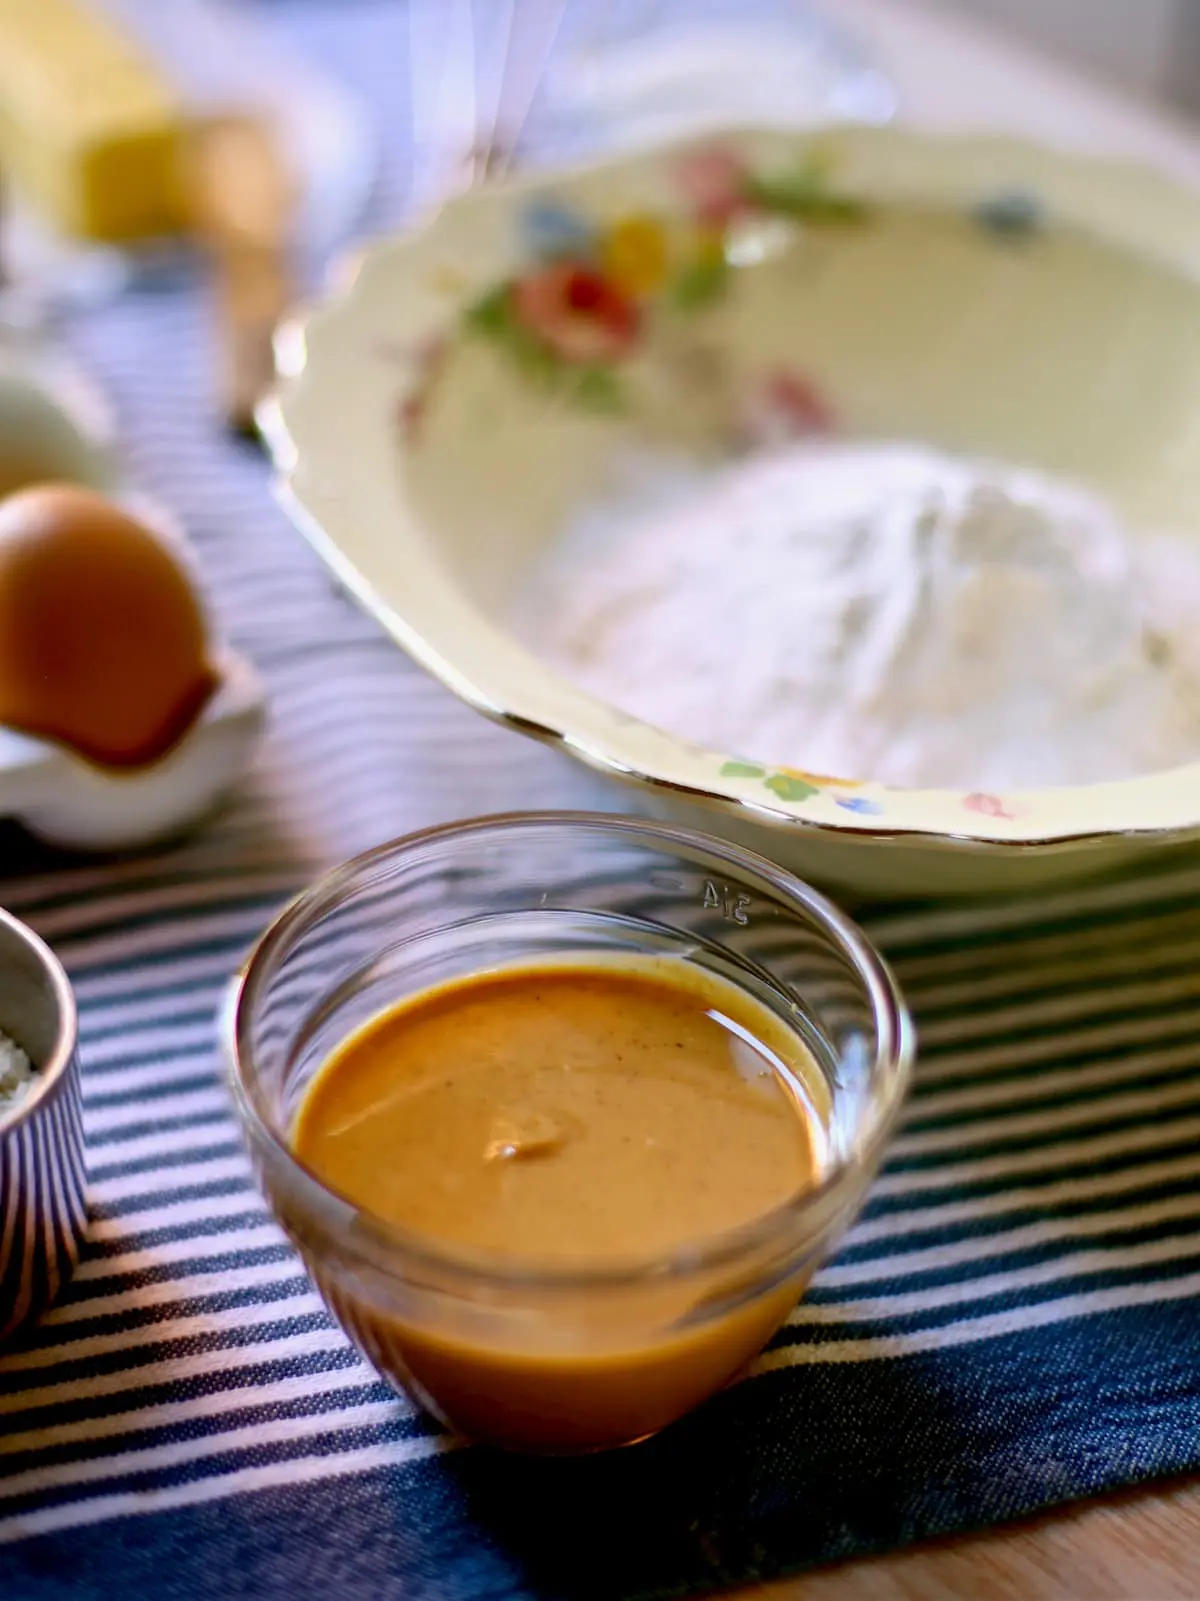 peanut butter and flour and eggs in containers on blue striped tablecloth